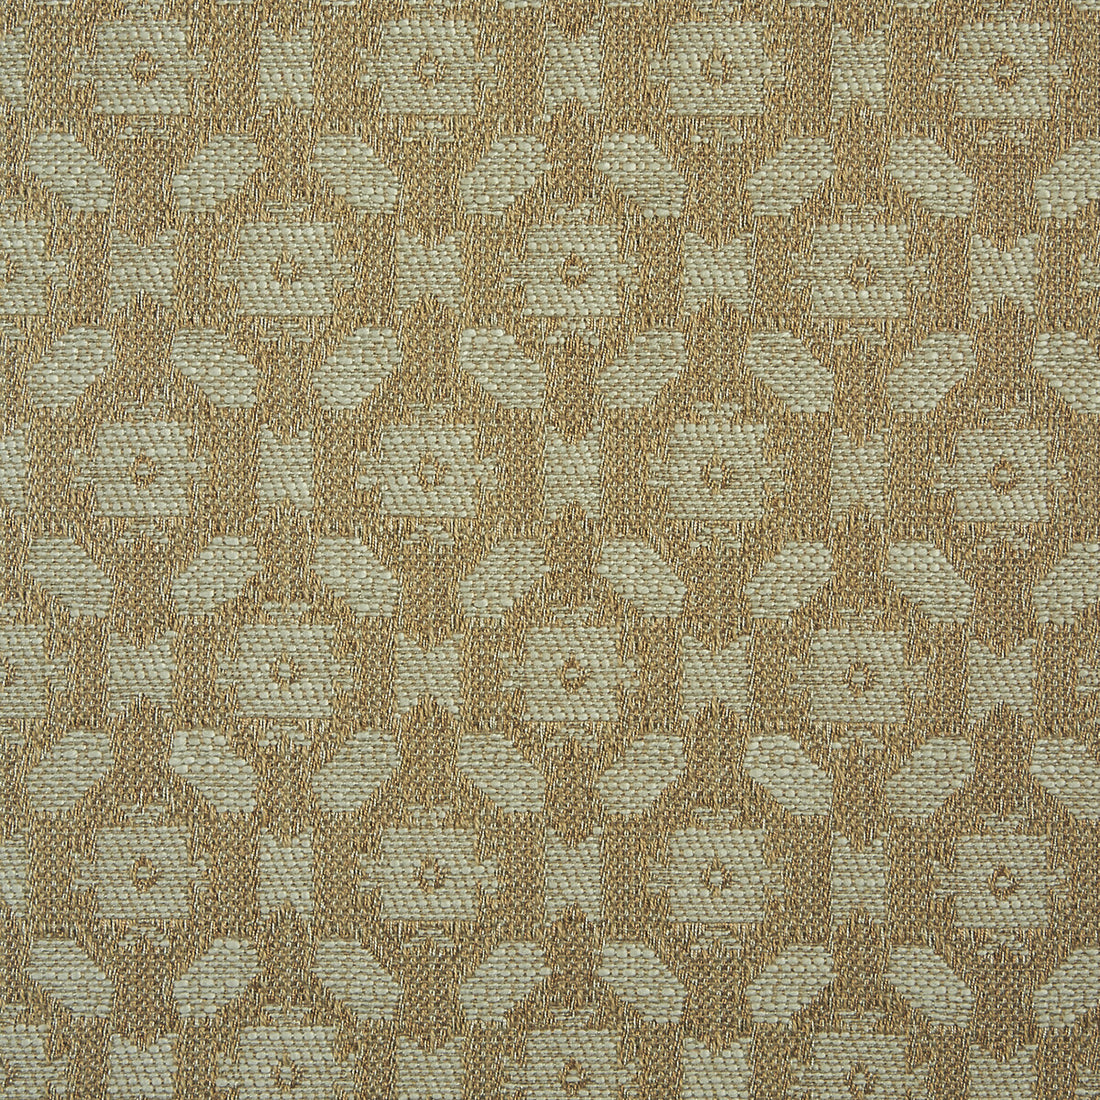 Lowell fabric in taupe/silver color - pattern BFC-3635.611.0 - by Lee Jofa in the Blithfield collection